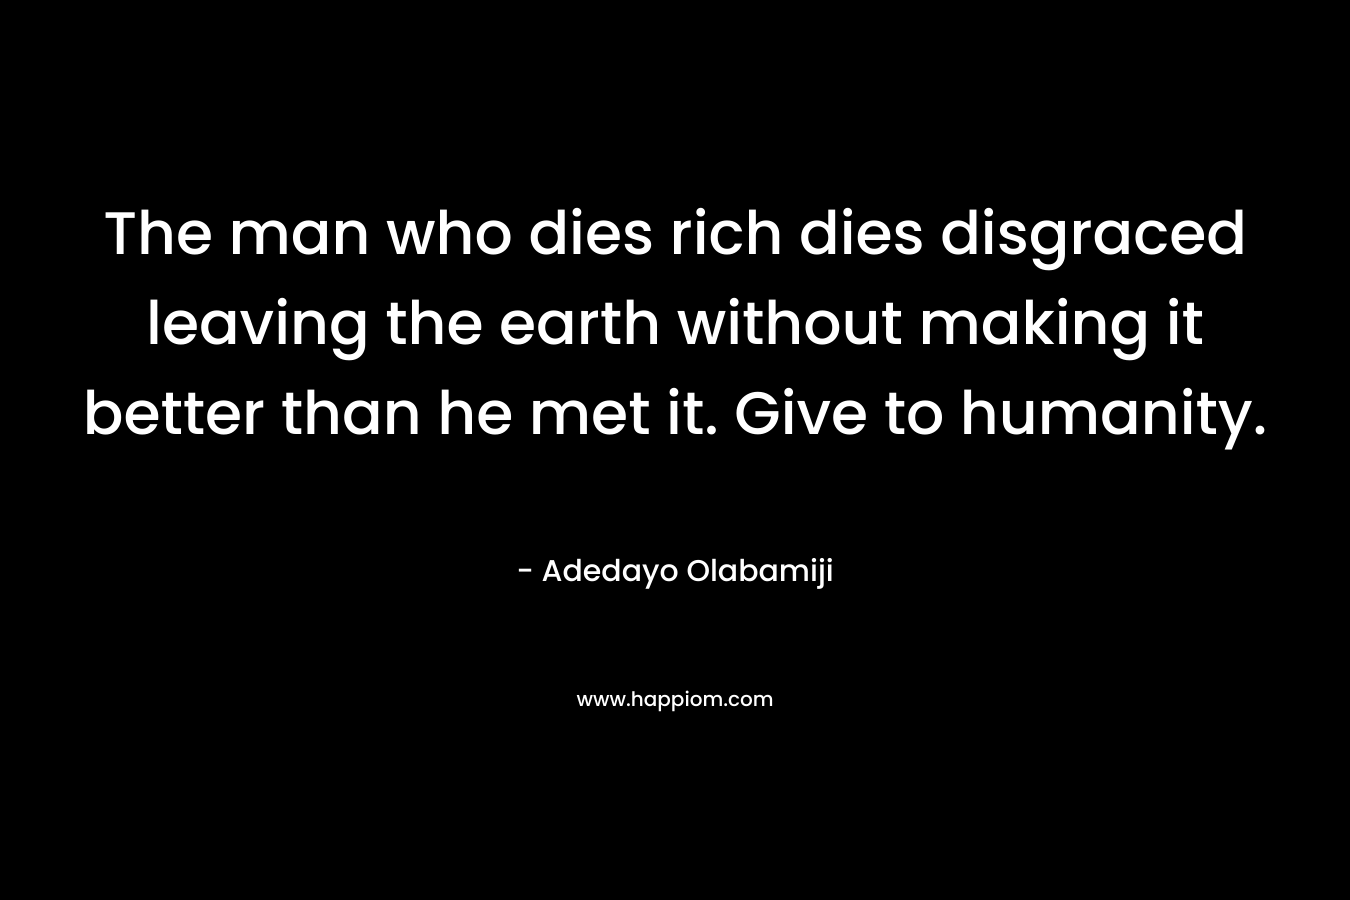 The man who dies rich dies disgraced leaving the earth without making it better than he met it. Give to humanity.